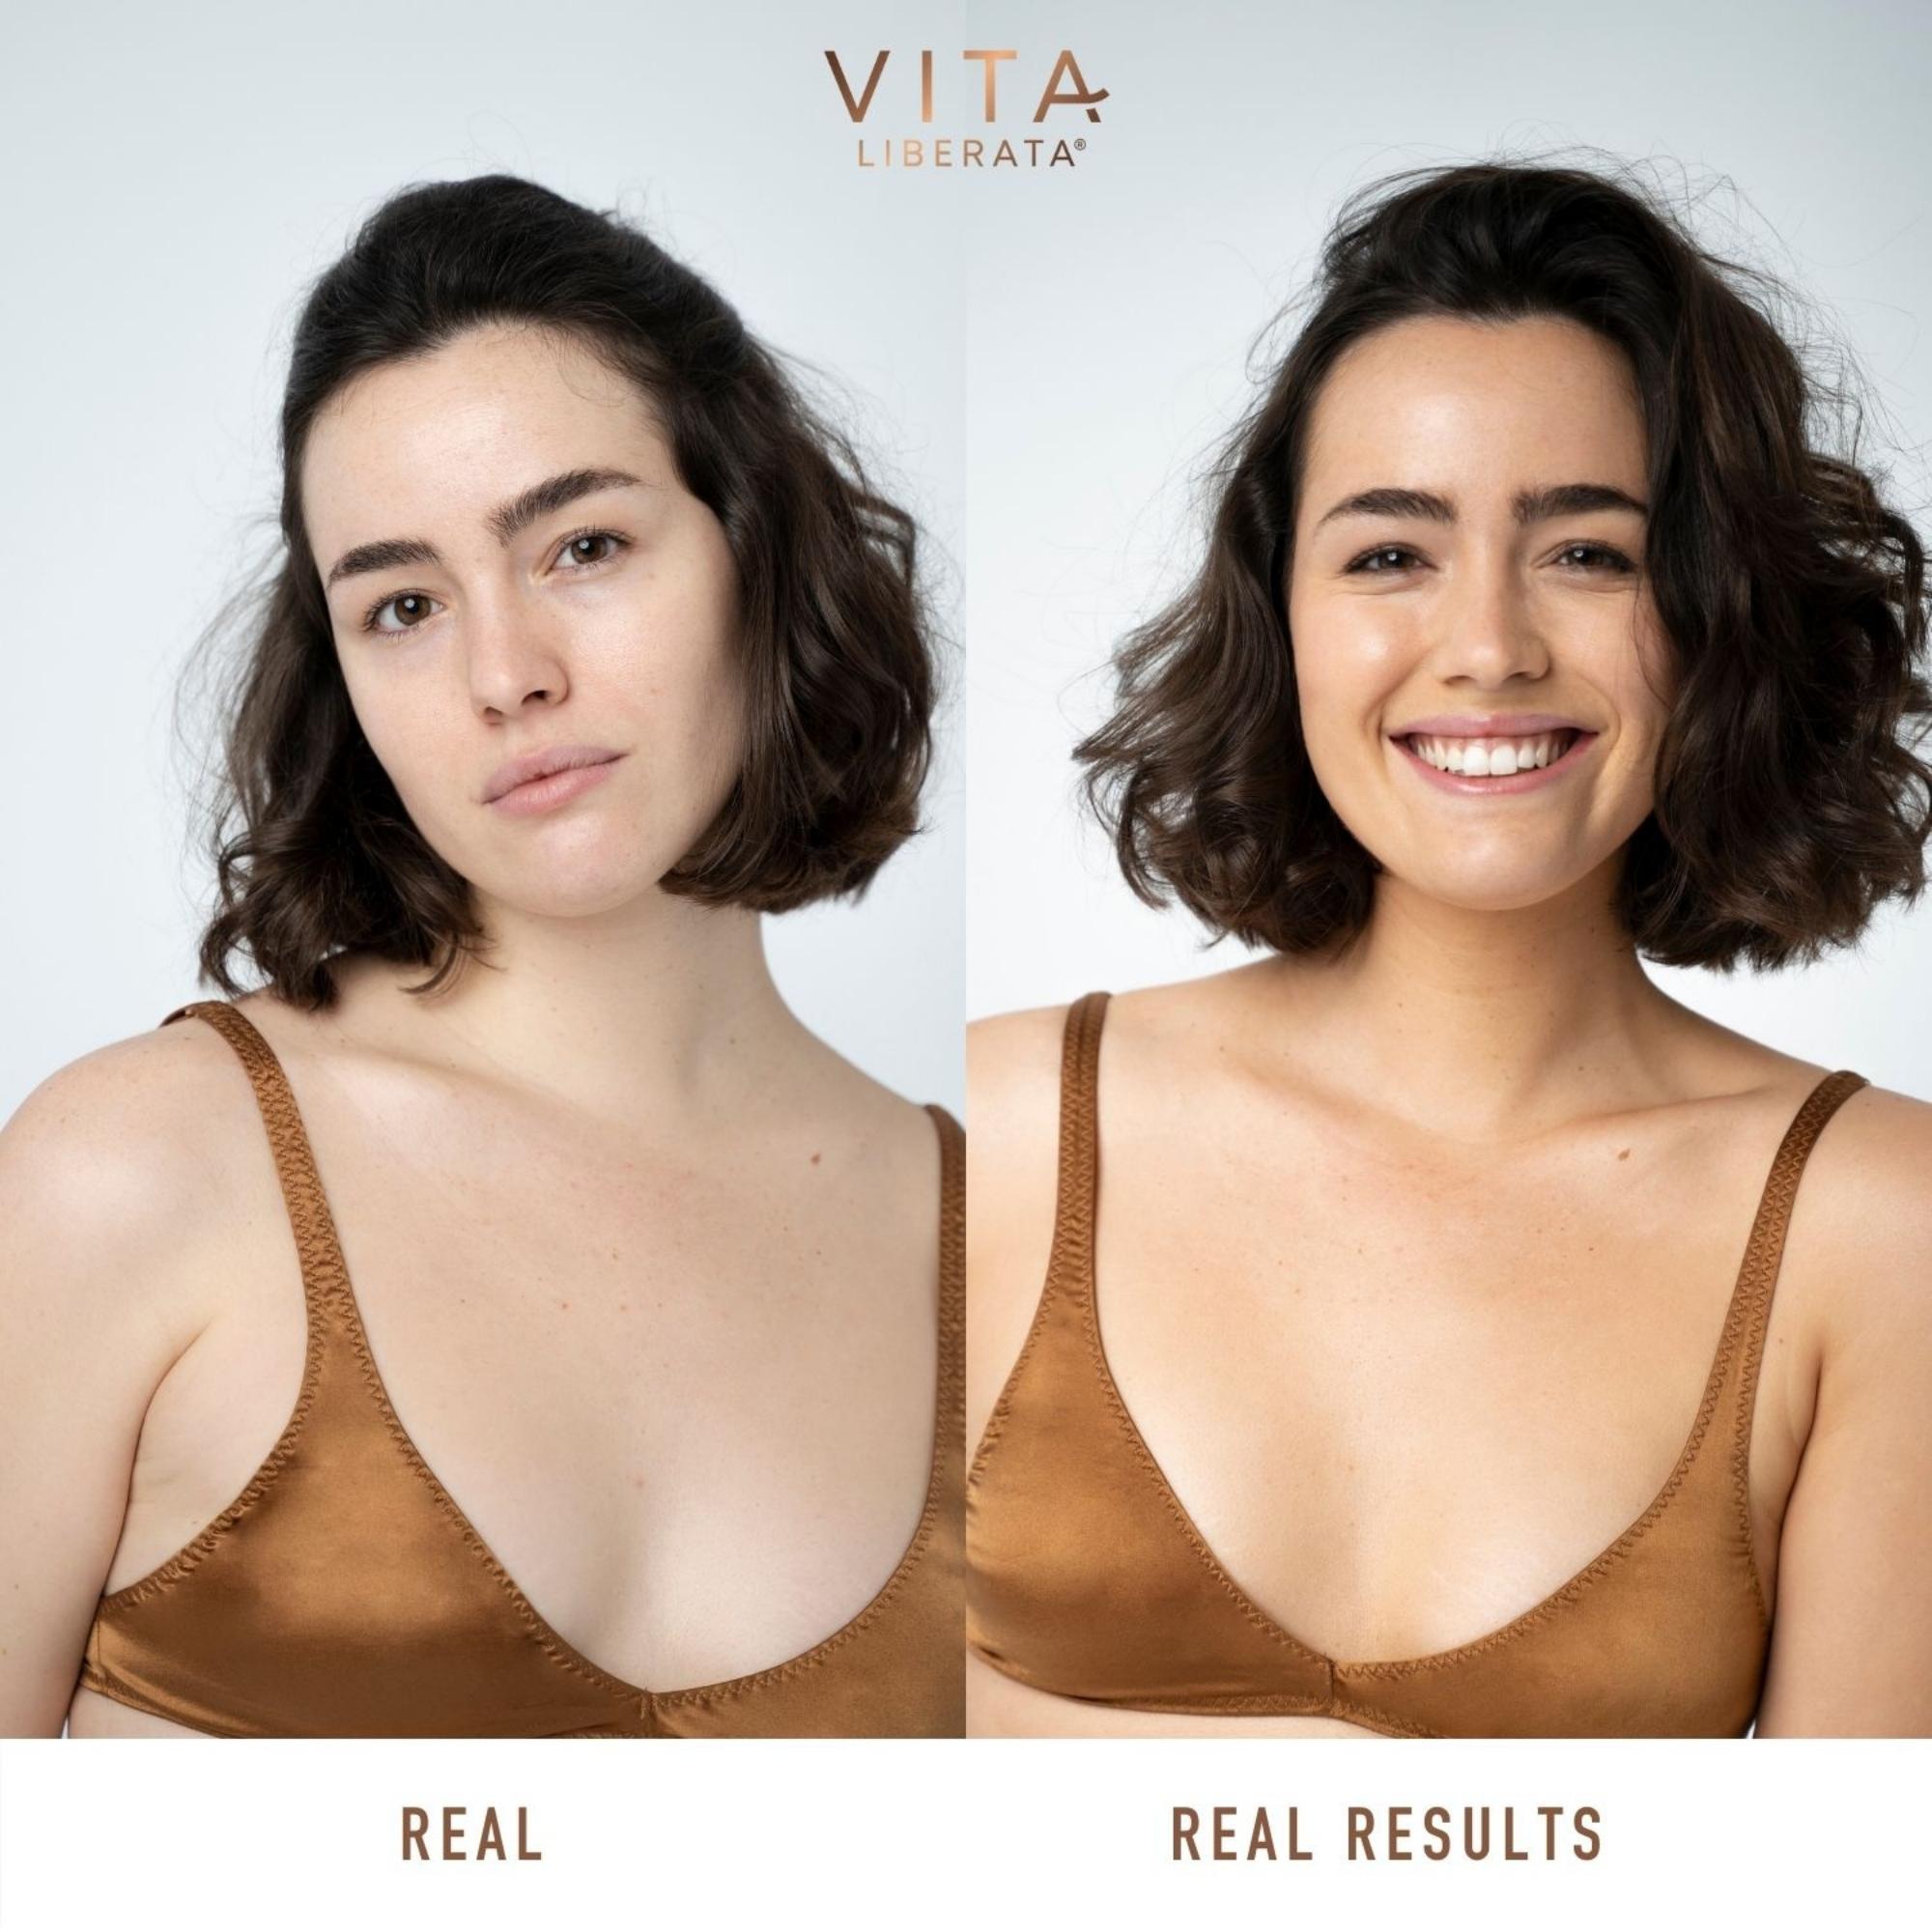 Real and Real Results before and after